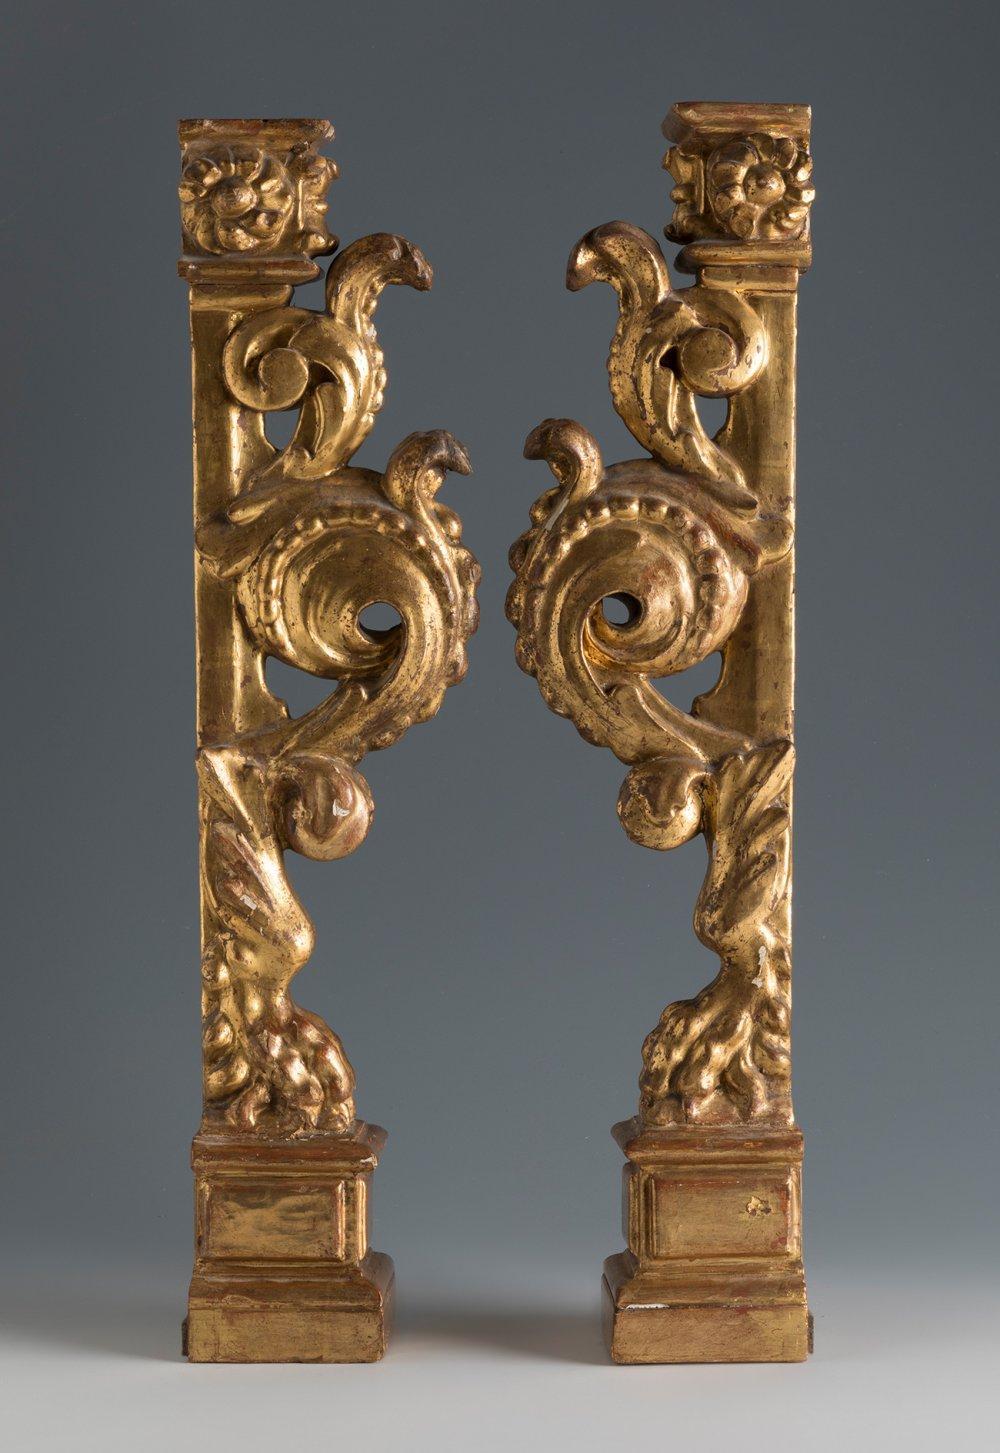 The present pair of late 17th century or early 18th century Spanish Baroque giltwood architectural elements may have once formed part of an altarpiece environment. Their decorative program features lion’s feet set upon Classically inspired plinths